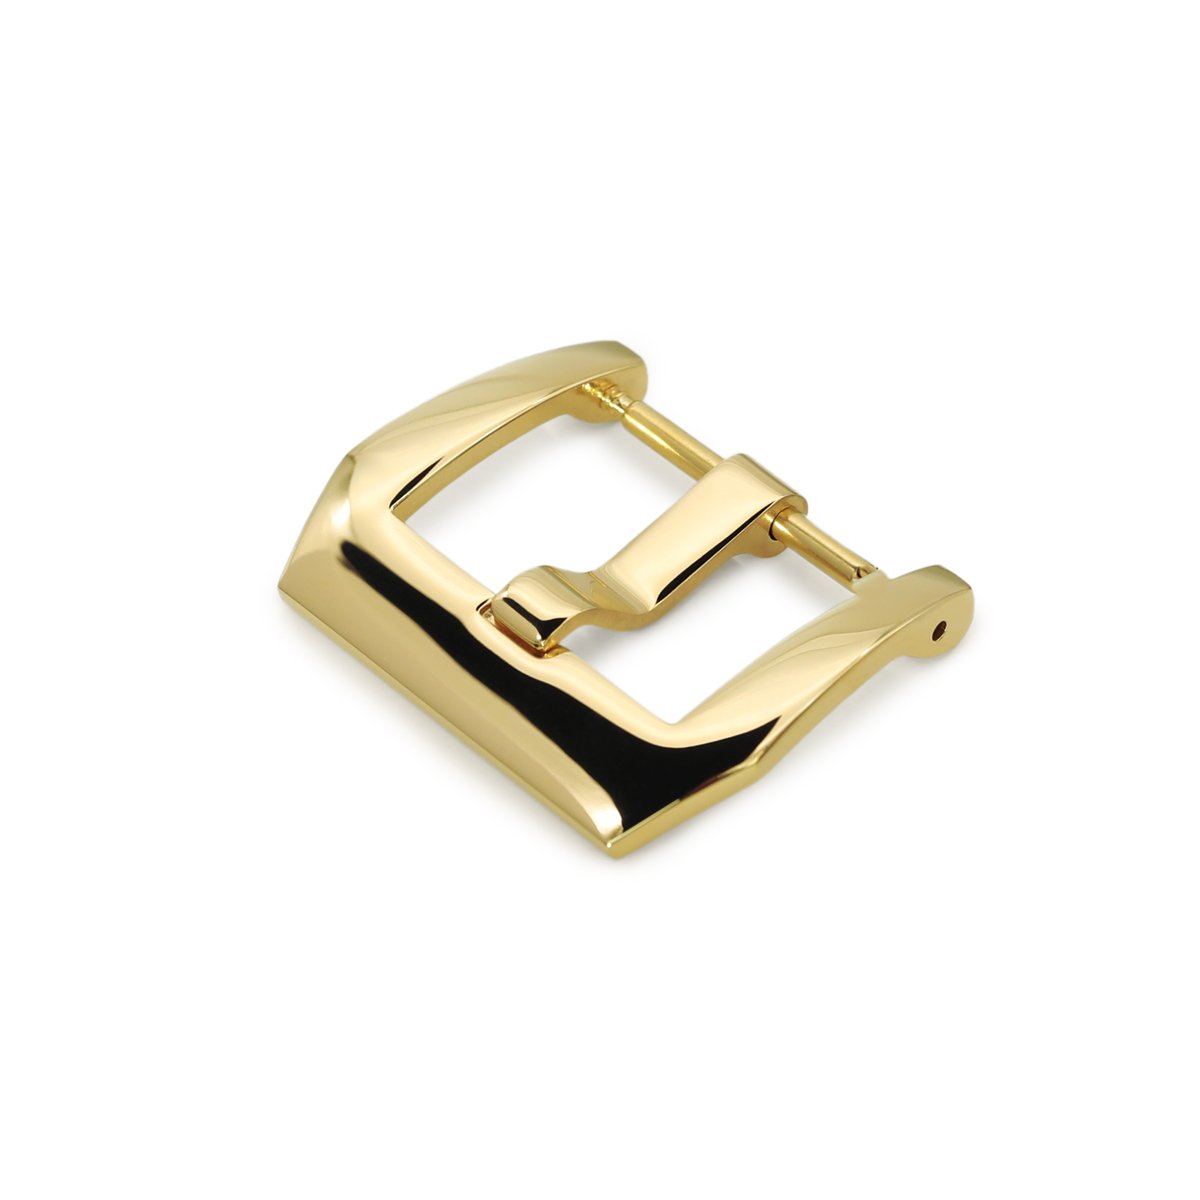 20mm #55 High Quality 316L Stainless Steel Sporty PV Spring Bar 4mm Tang Buckle Polished IP Gold finish Strapcode Buckles